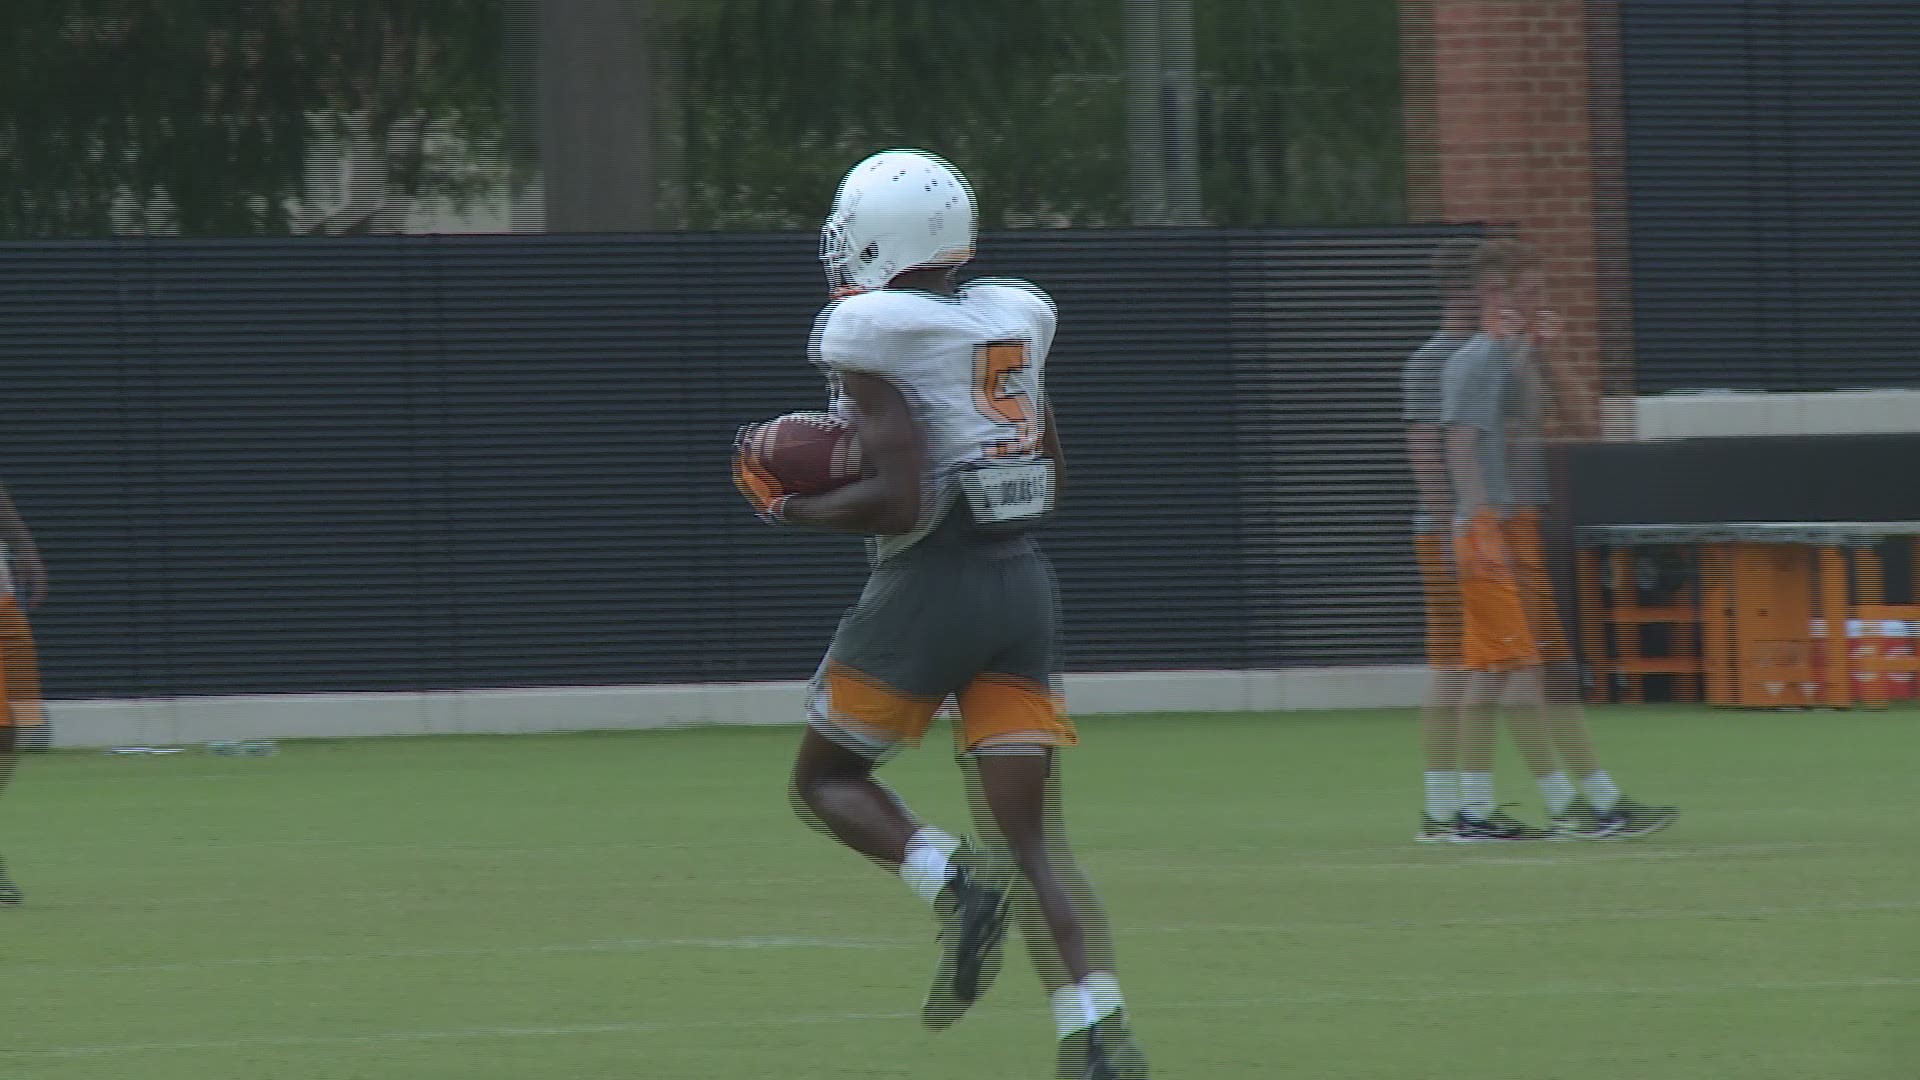 The Vols practiced in shells (helmets, shoulder pads, shorts) on Saturday afternoon after Friday's night practice. We're three weeks away from the first game of the 2019 season.